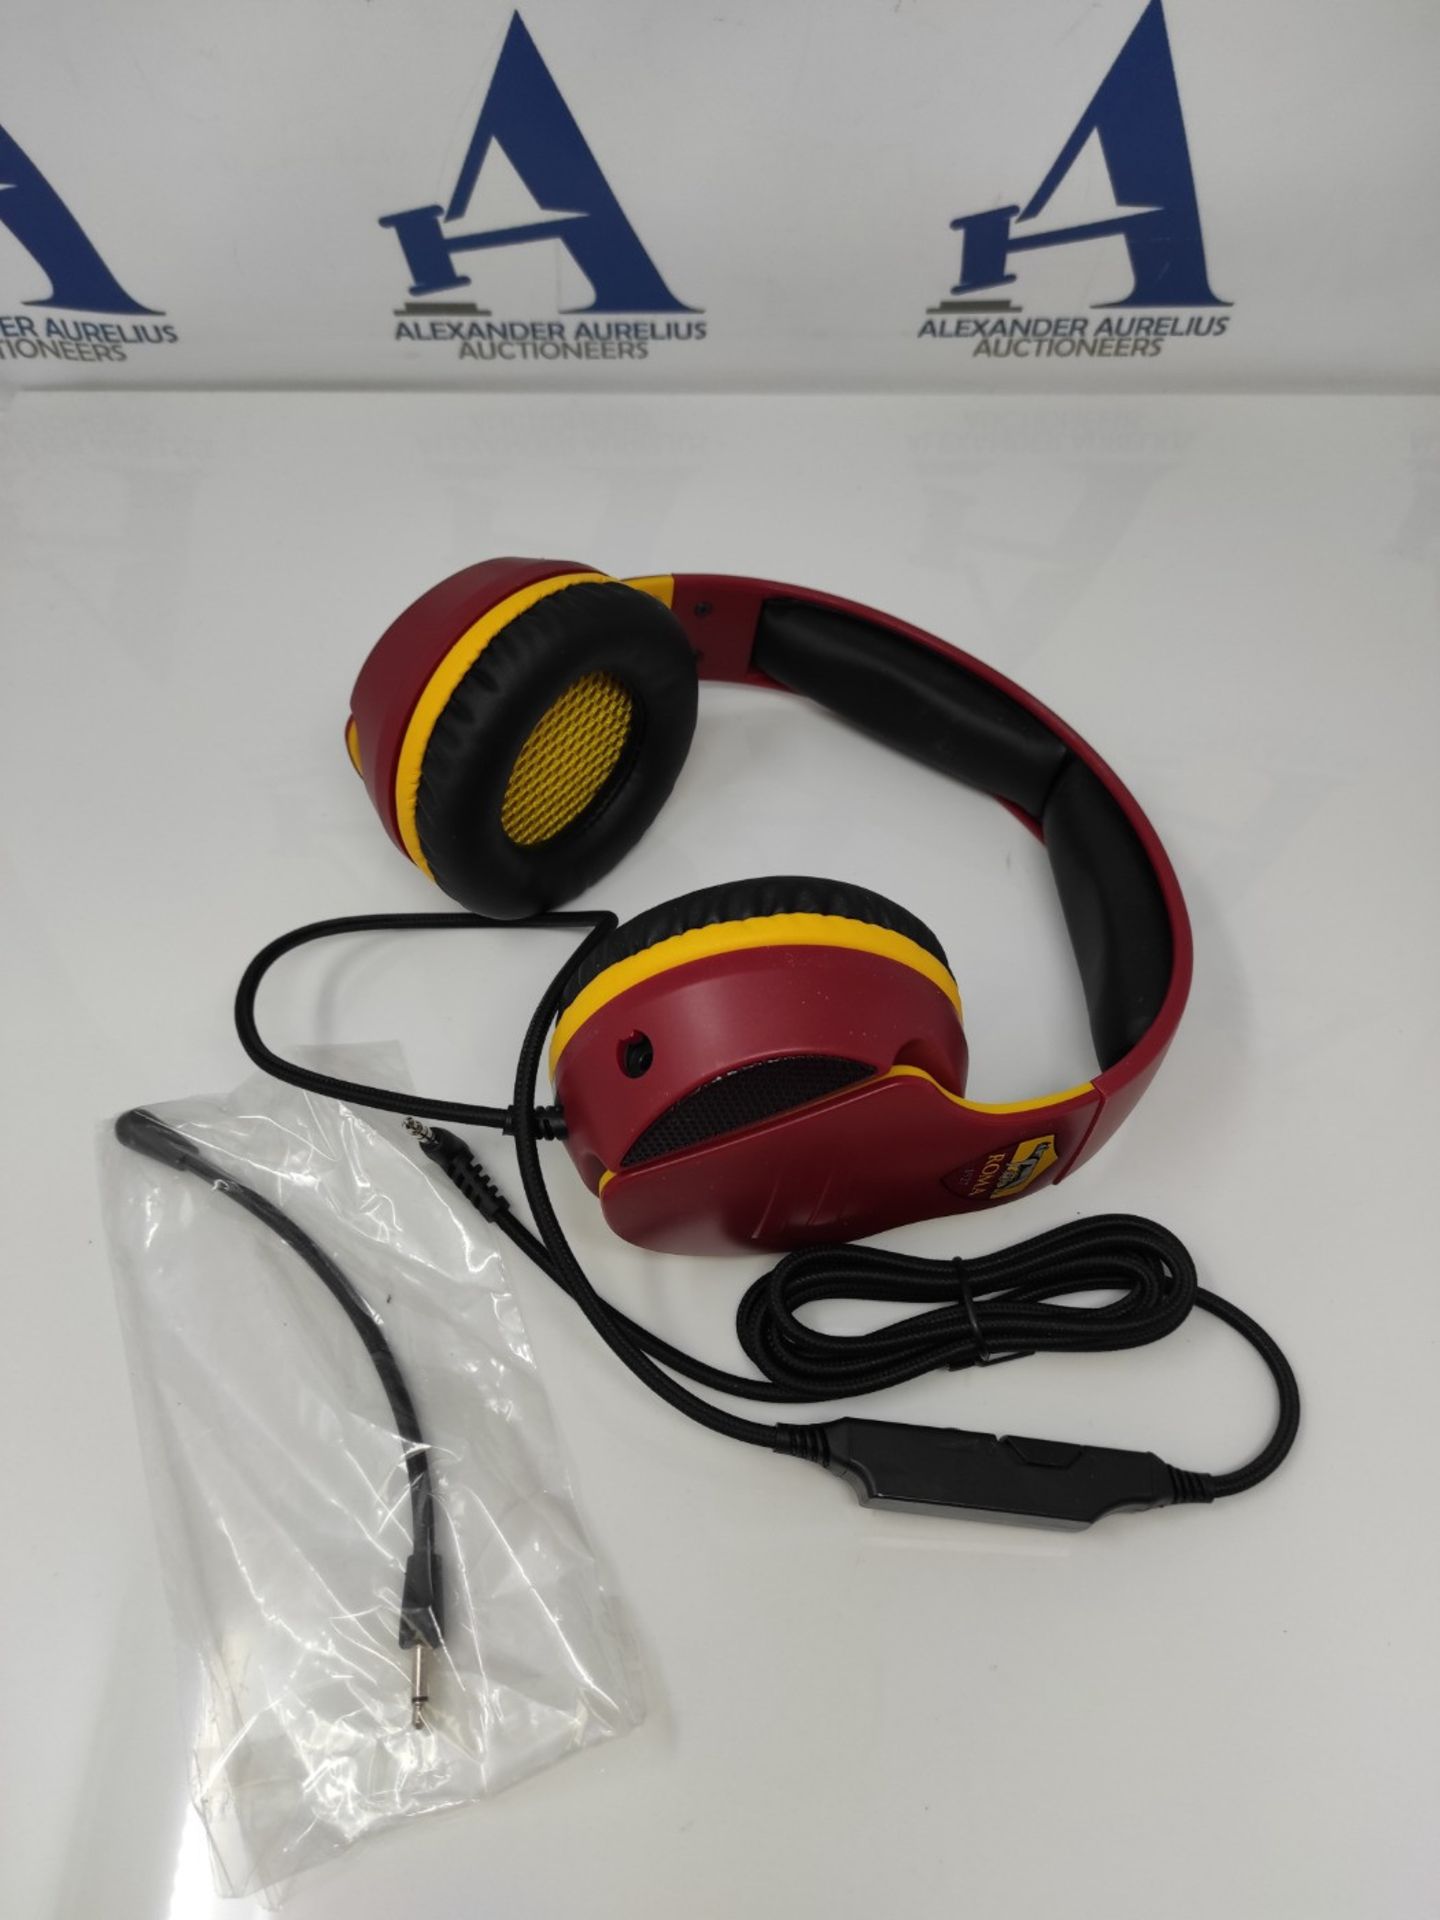 Qubick Gaming Stereo Headphones As Roma - Image 3 of 3